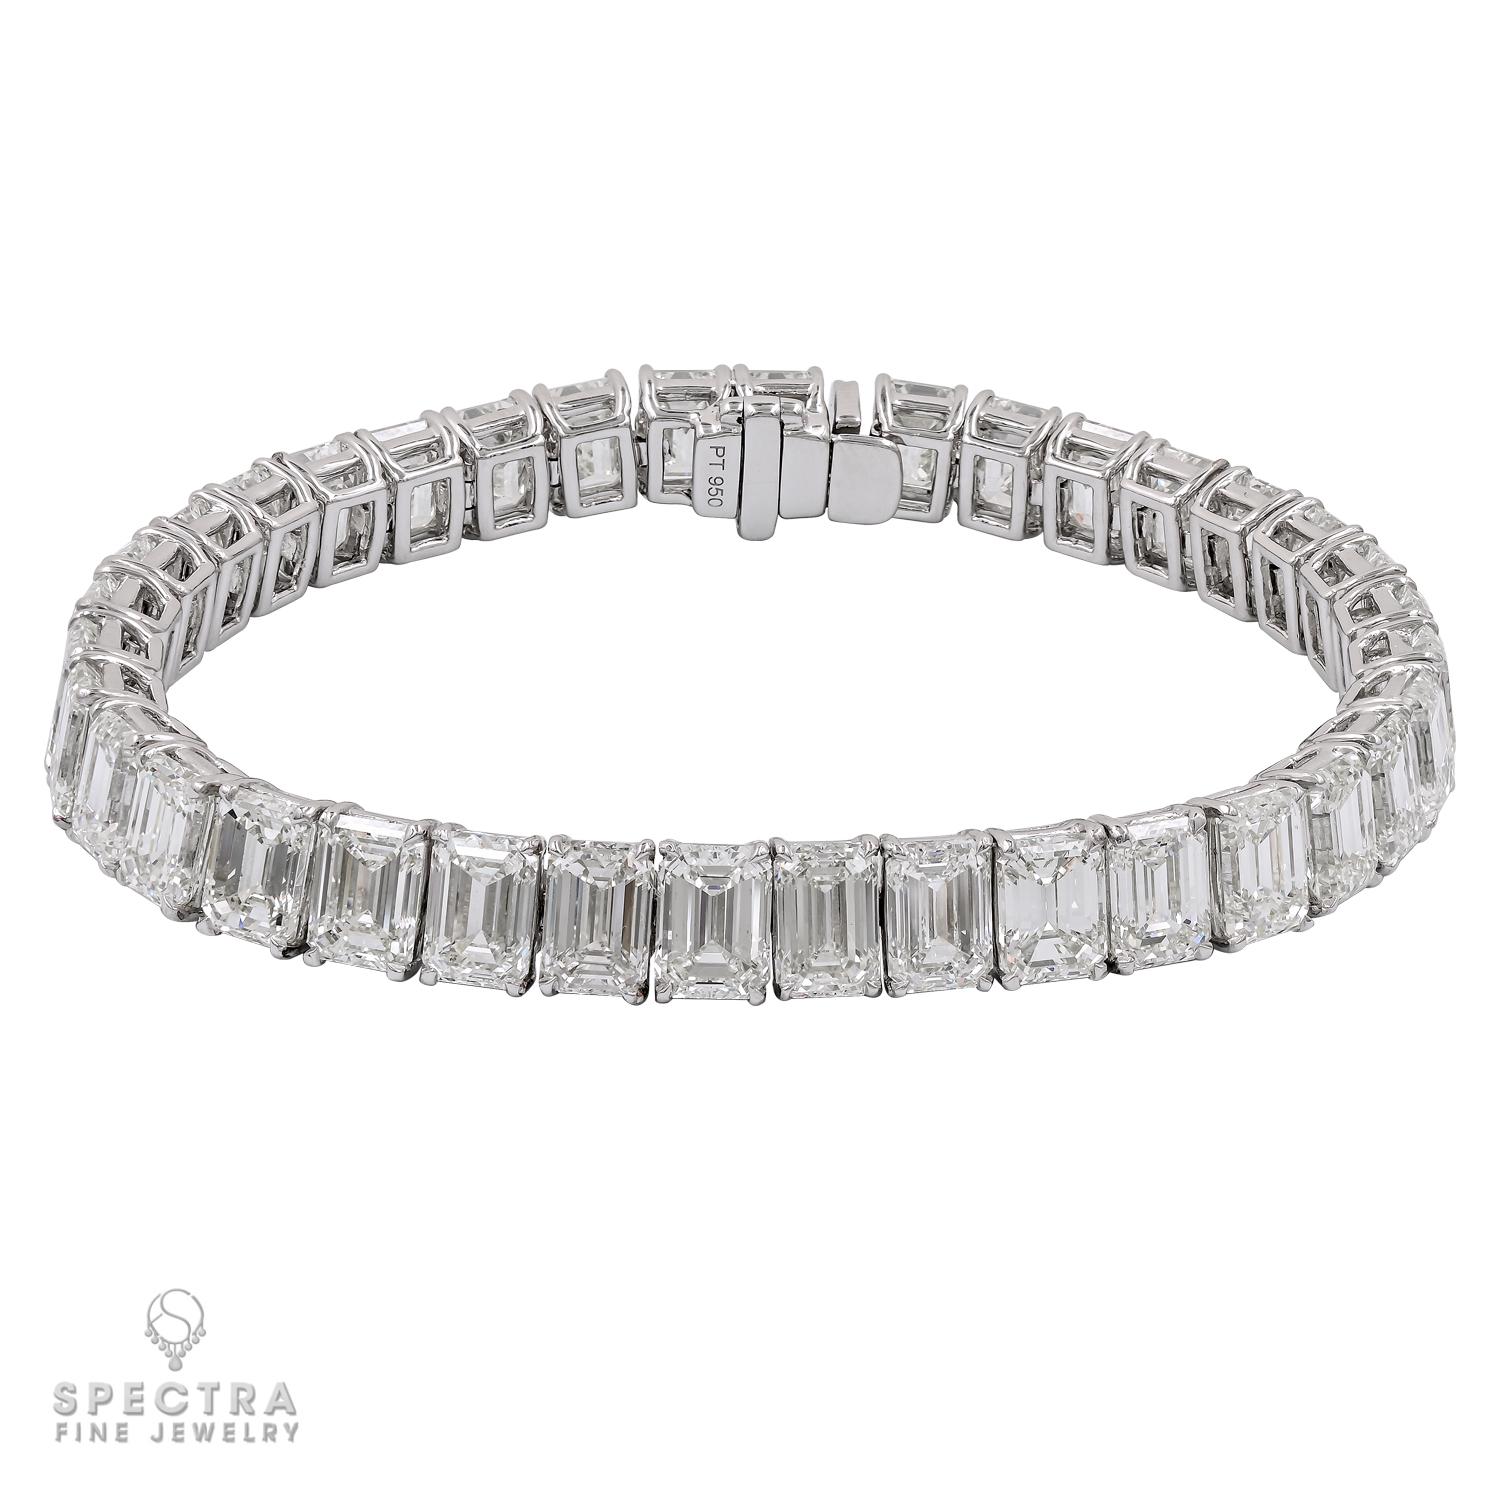 A dazzling tennis bracelet is always a stylish choice, and this Spectra Fine Jewelry Emerald-cut Diamond Tennis Bracelet is no exception. Originating from the 21st century, it's crafted in platinum and boasts 36 emerald-cut diamonds, totaling